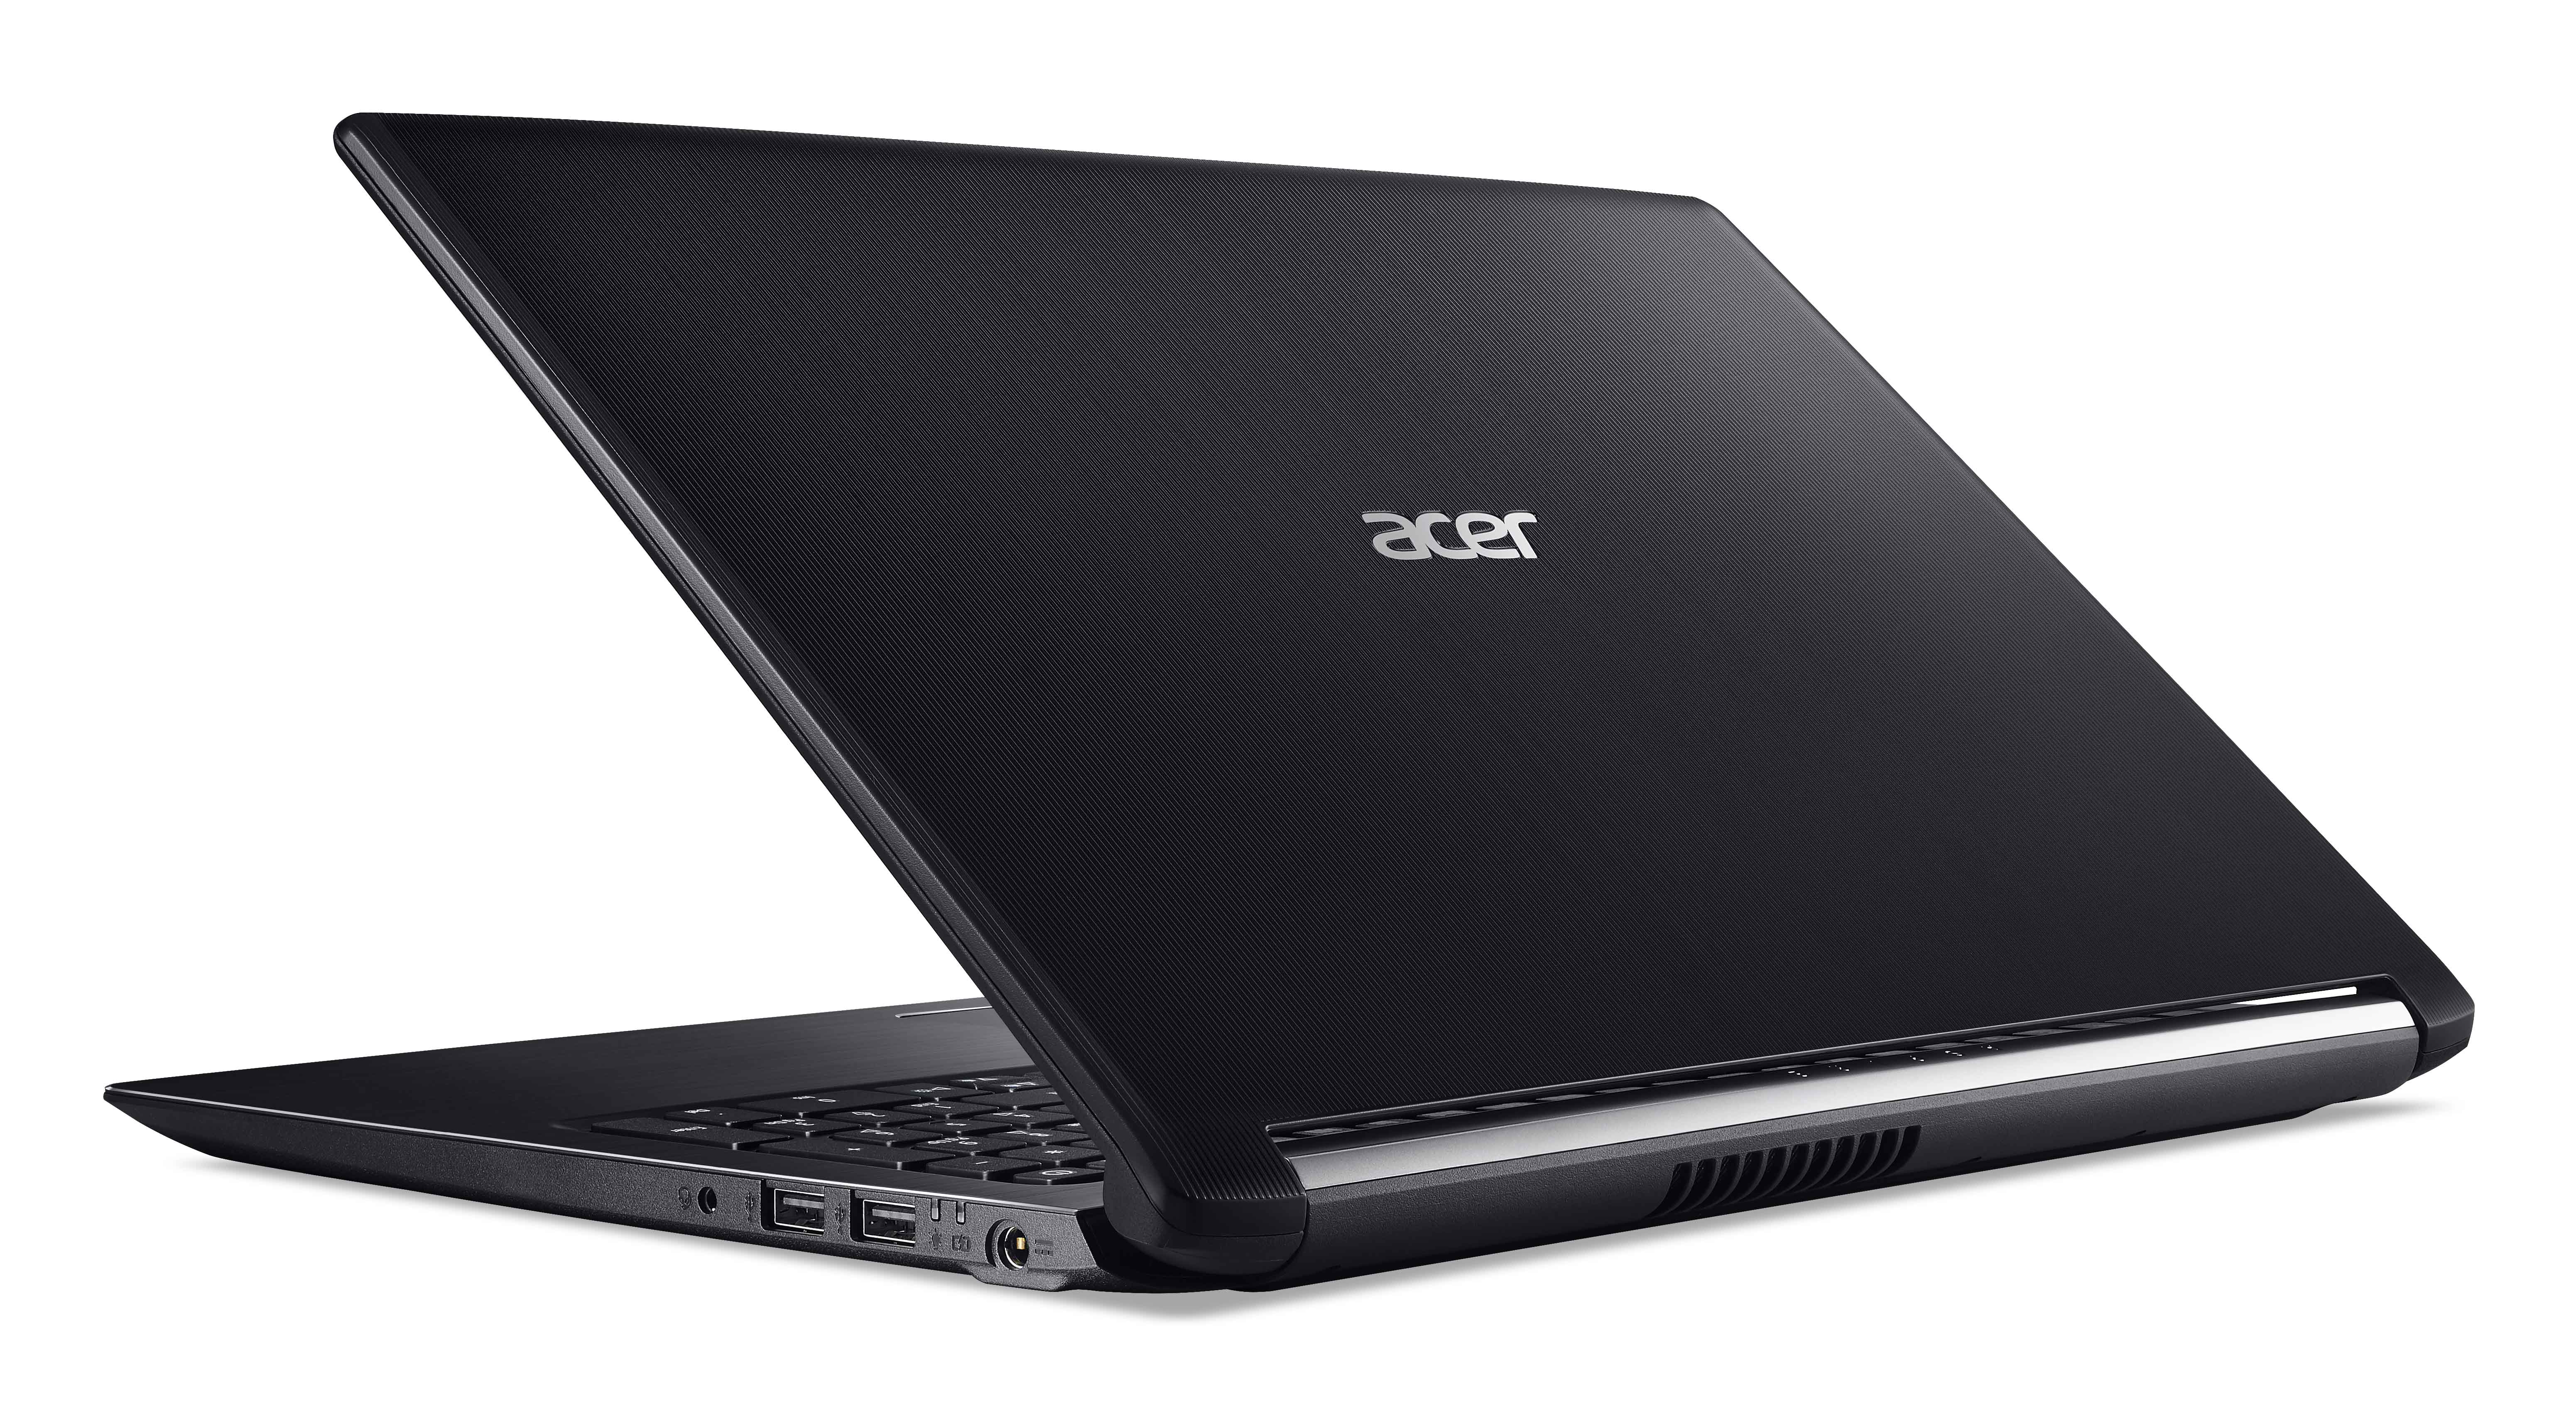 The Acer Aspire 5 with Windows 10